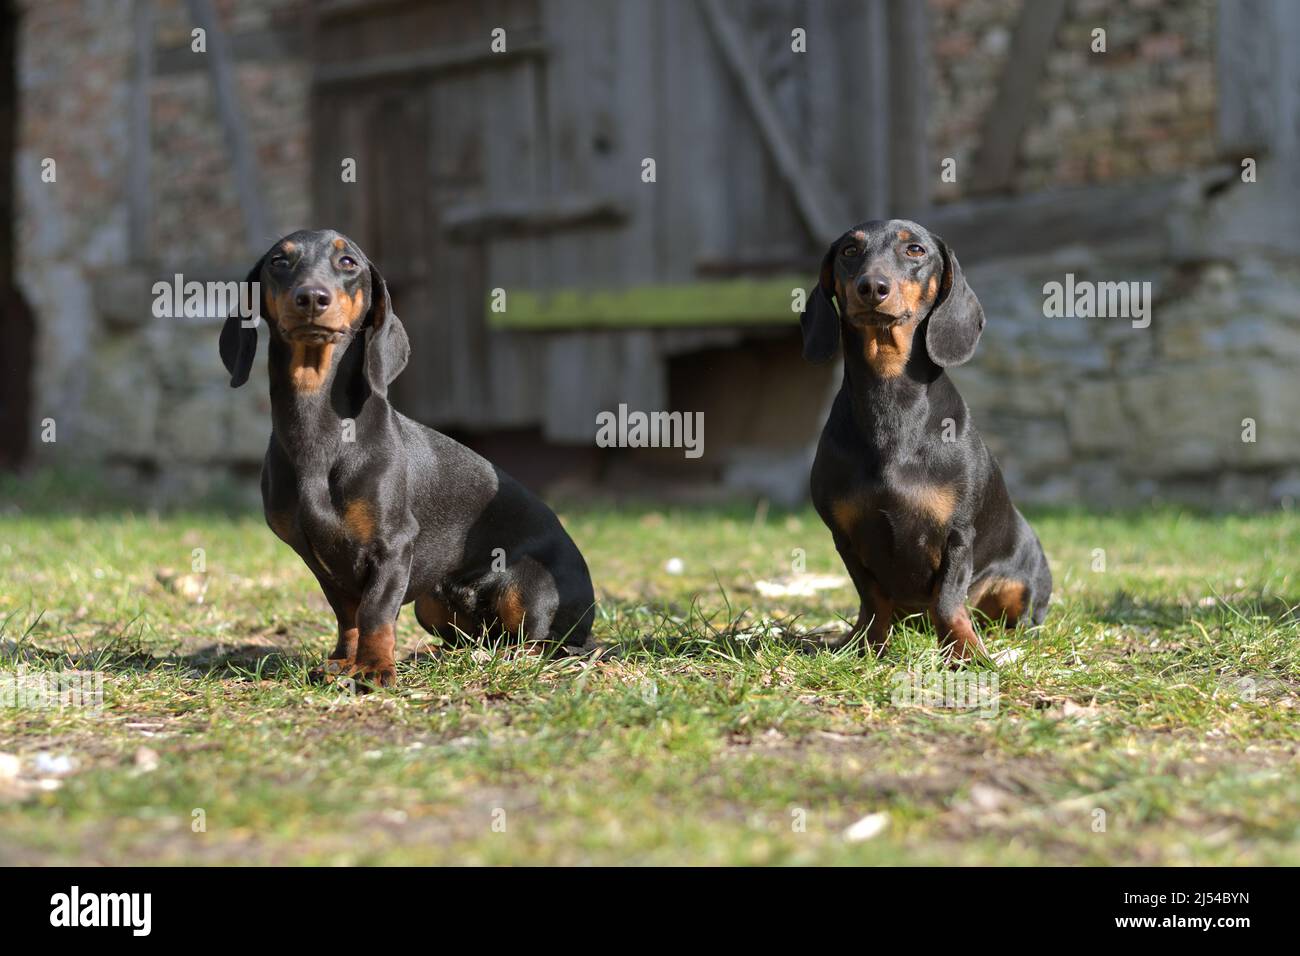 Short-haired Dachshund, Short-haired sausage dog, domestic dog (Canis lupus f. familiaris), two short-haired Dachshunds sitting in front of an old Stock Photo